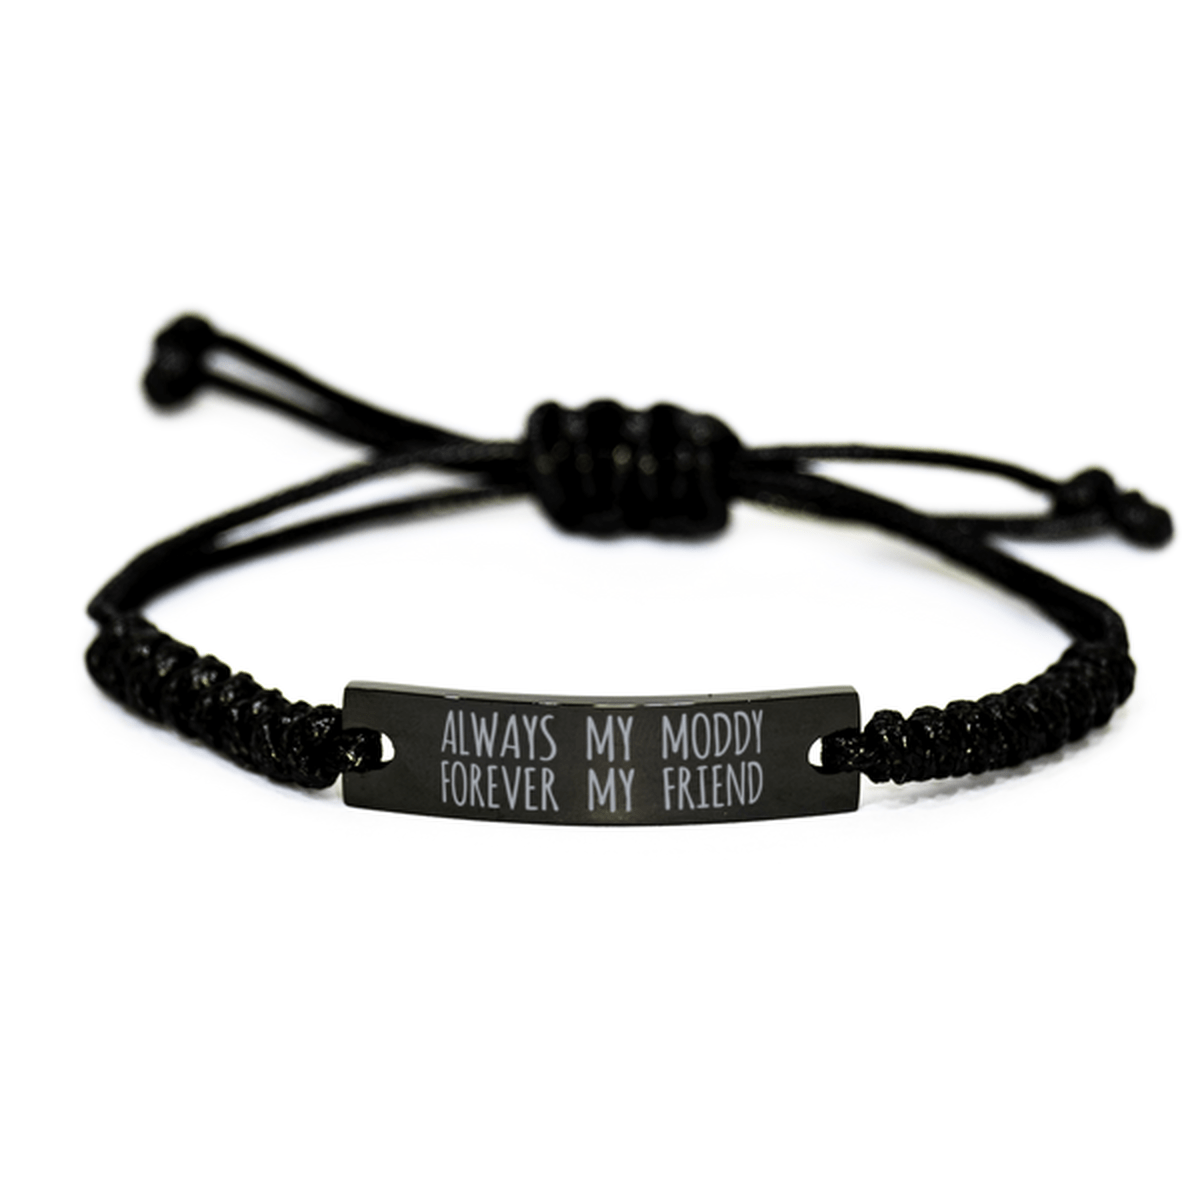 Inspirational Moddy Black Rope Bracelet, Always My Moddy Forever My Friend, Best Birthday Gifts For Family